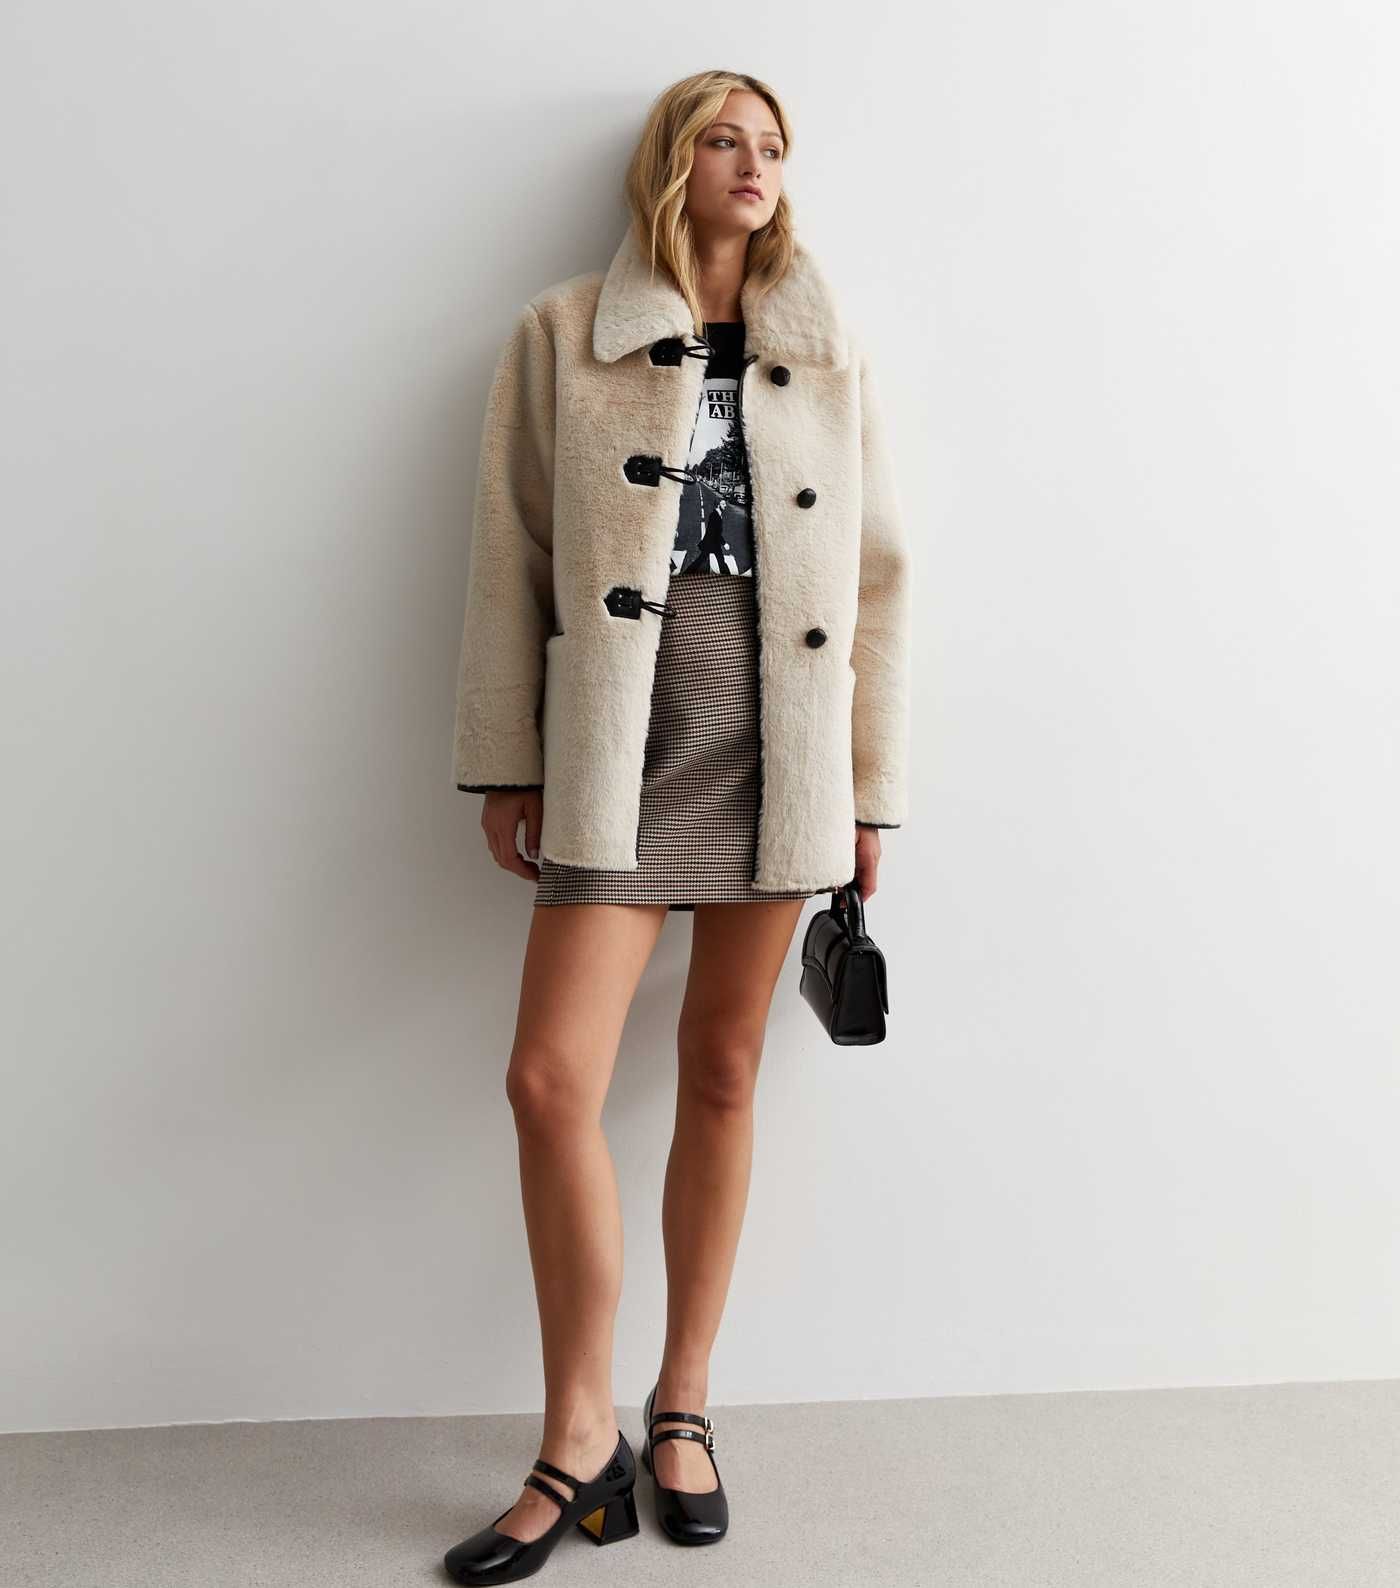 Cream Faux Fur Toggle Coat
						
						Add to Saved Items
						Remove from Saved Items | New Look (UK)